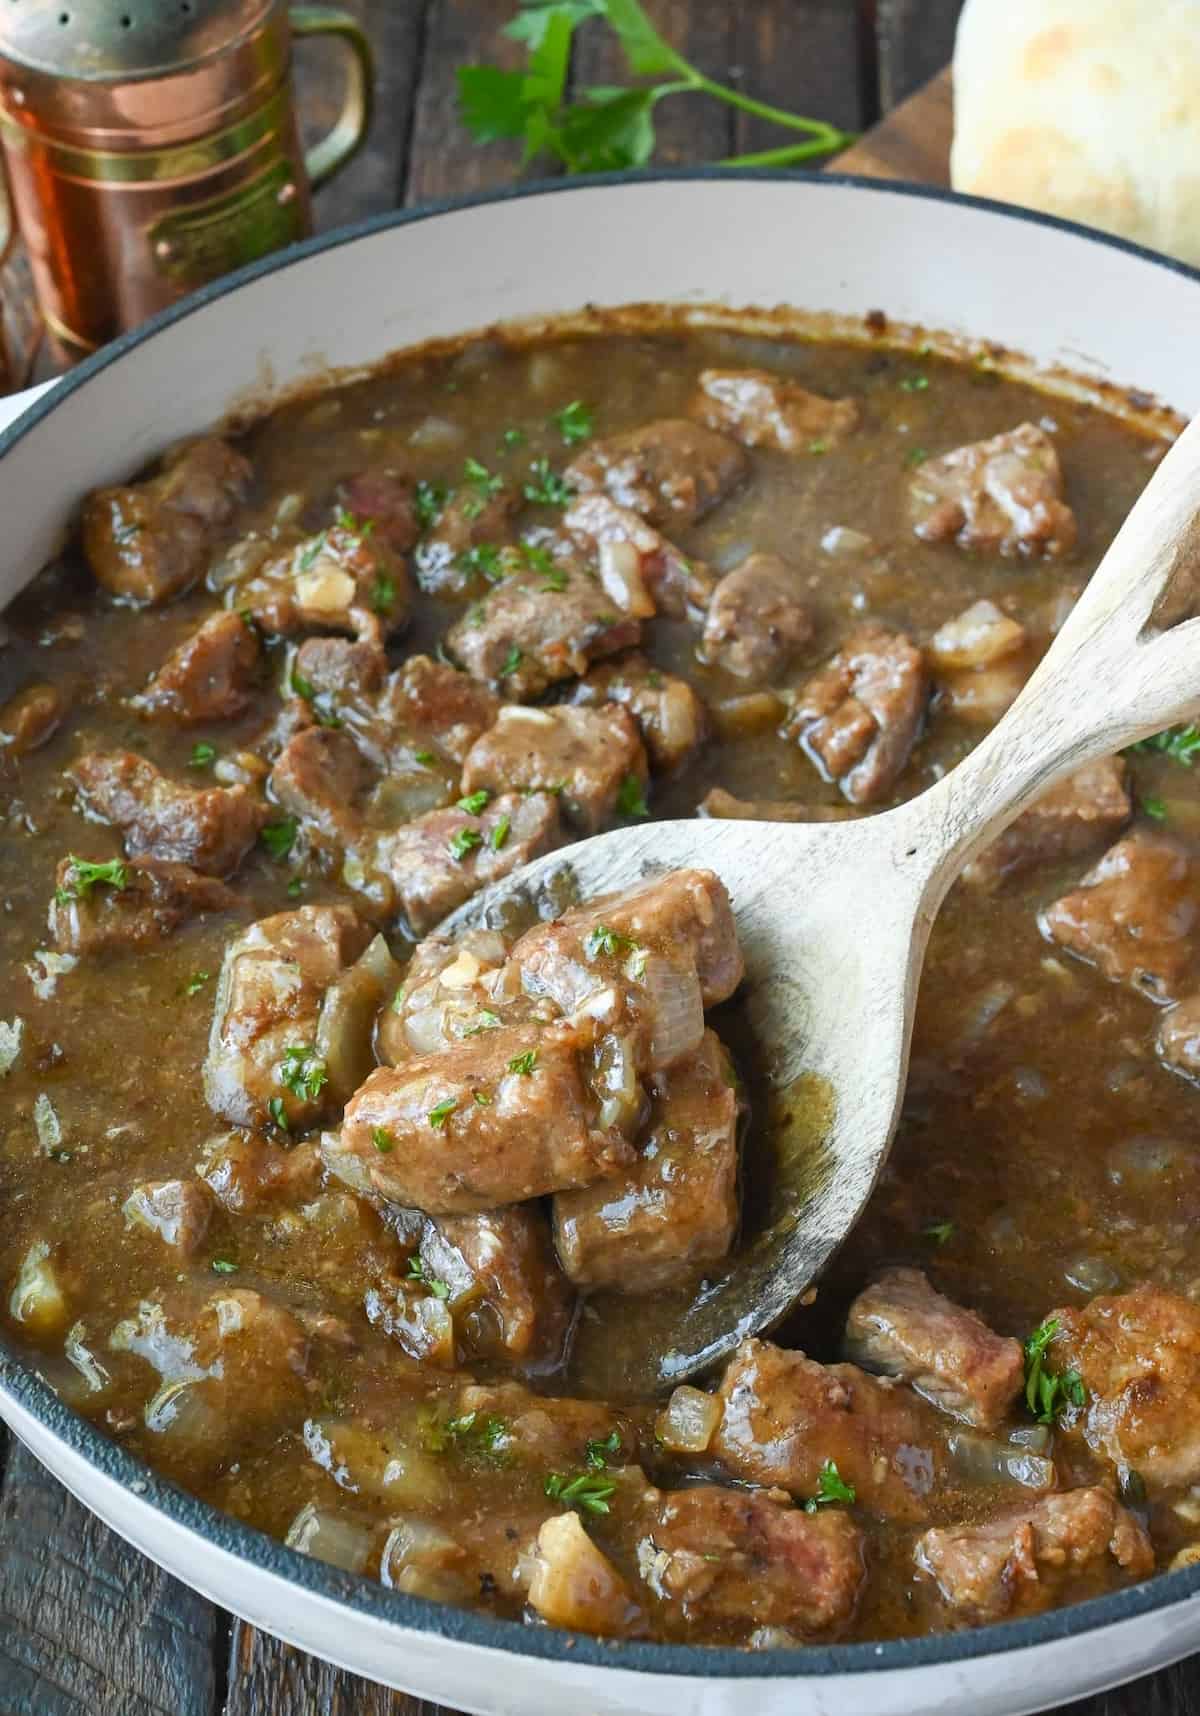 Close up of a spoon in a pot of beef tips and gravy.